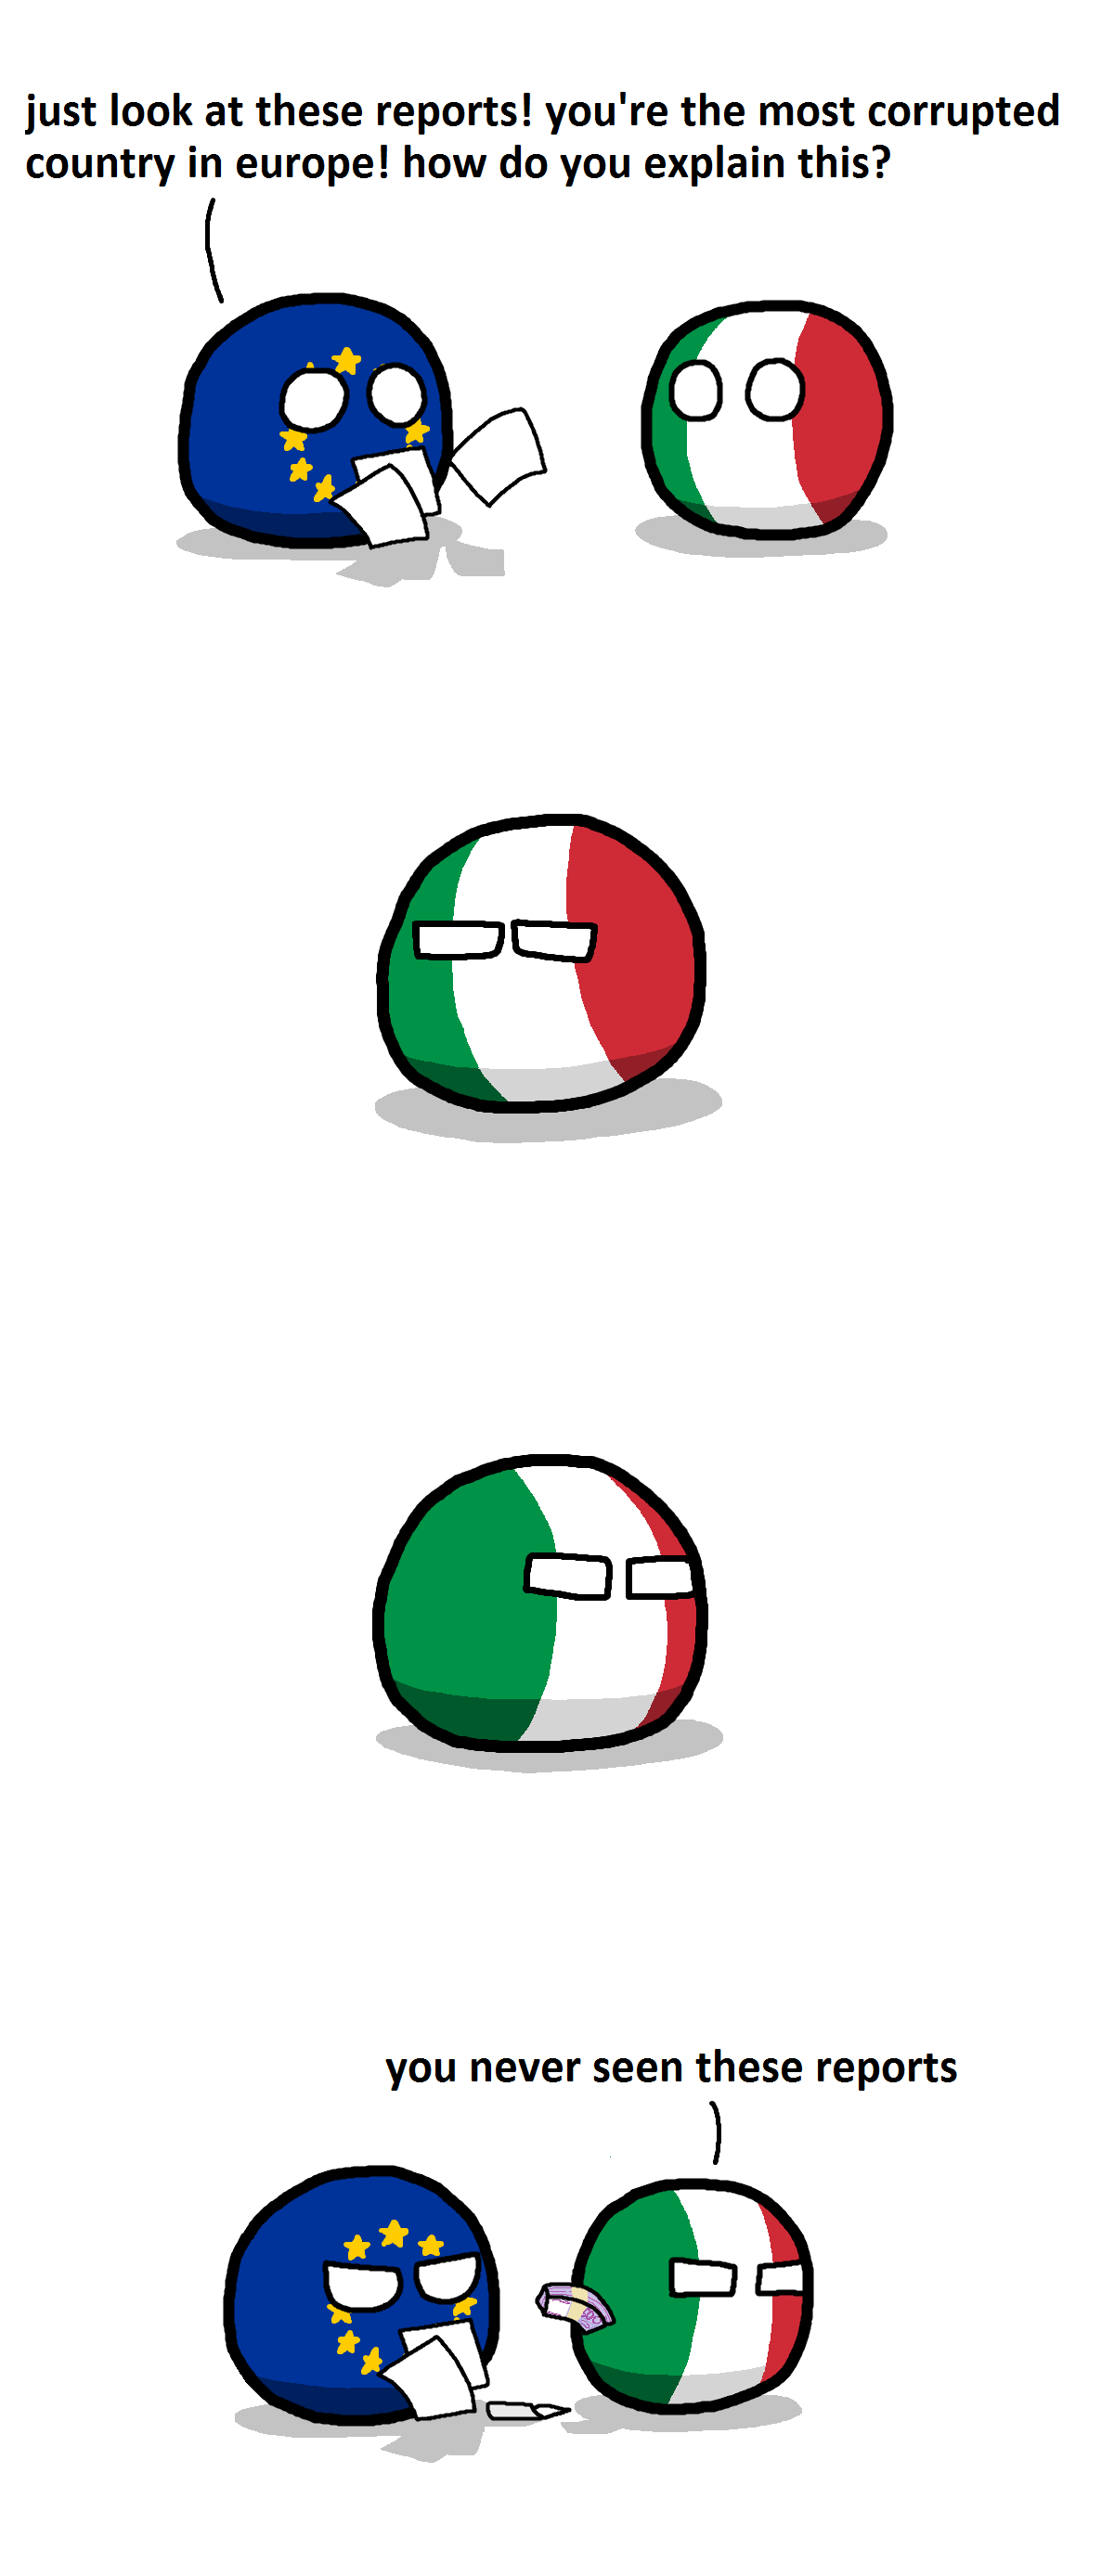 italy is the cleanest of the clean